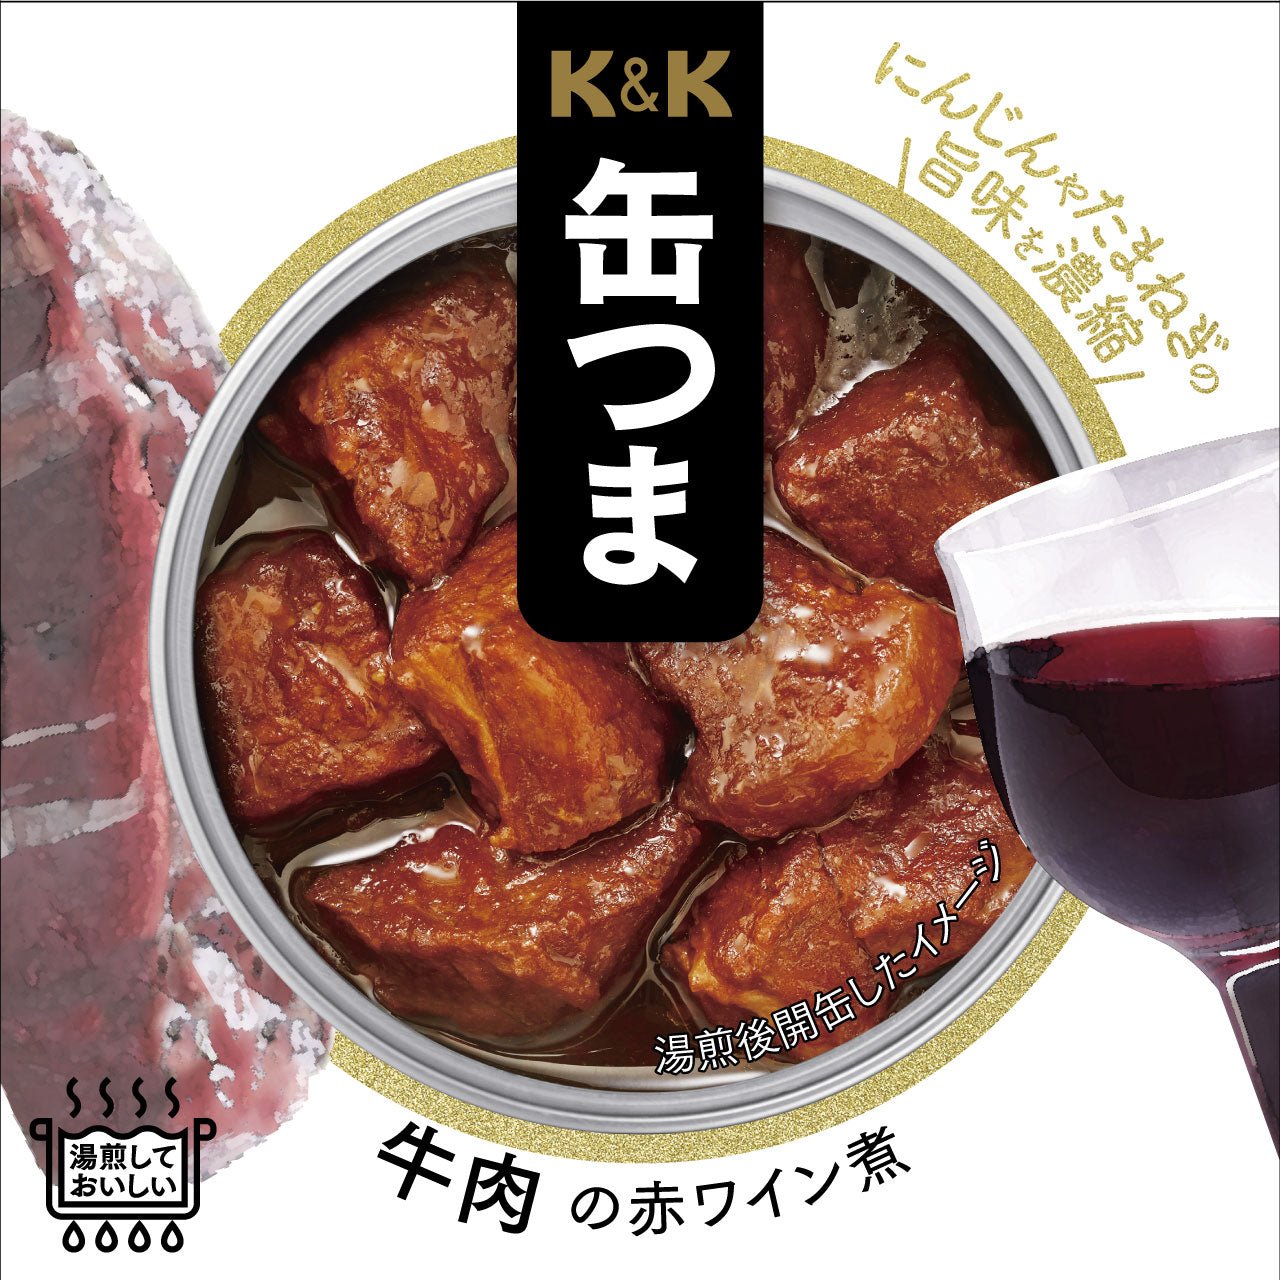 Boiled red wine of K & K canned beef